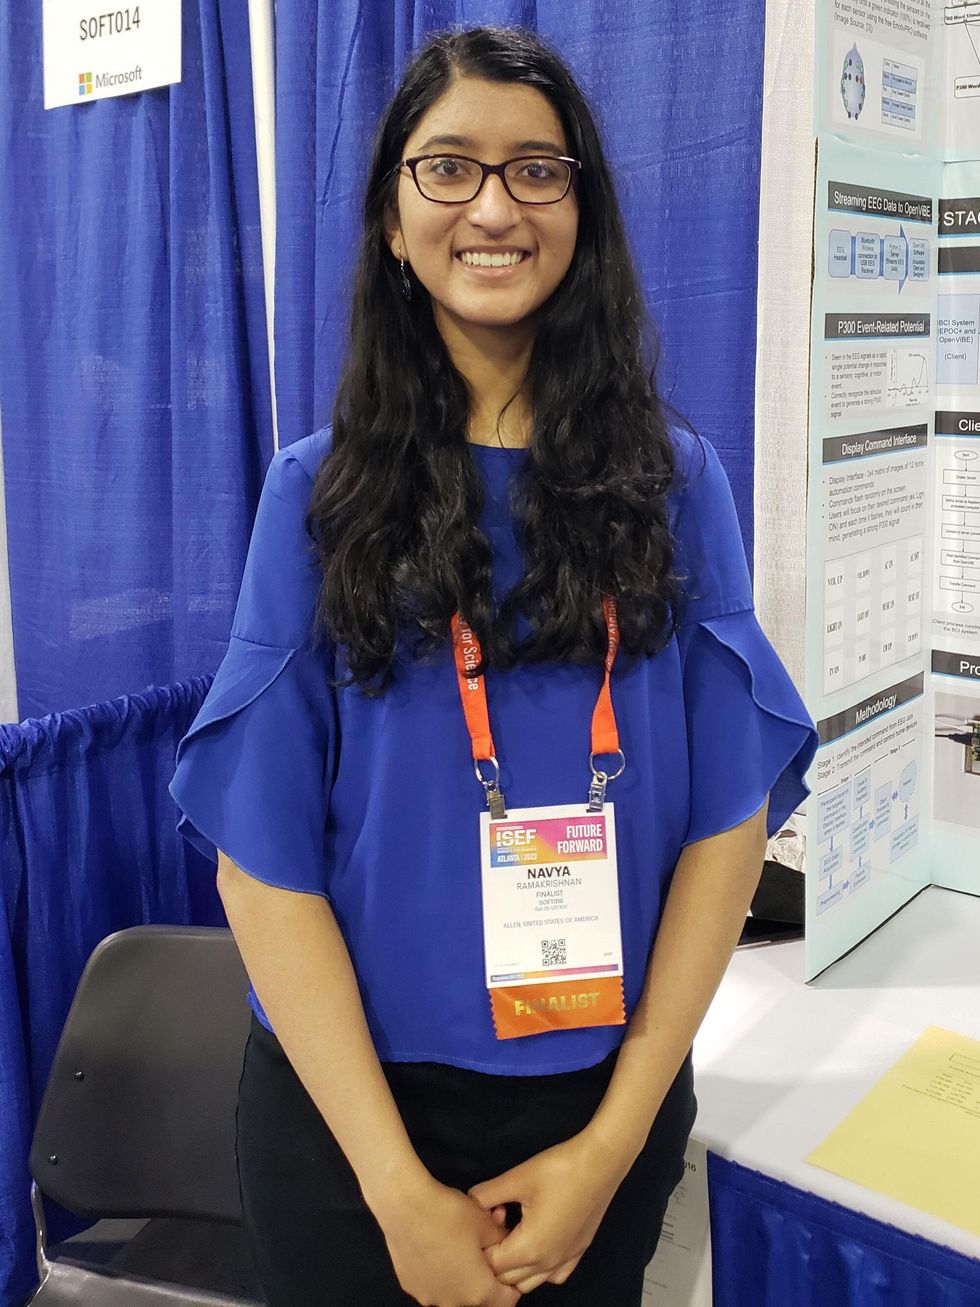 A student with a lanyard indicating that she has become an ISEF finalist.